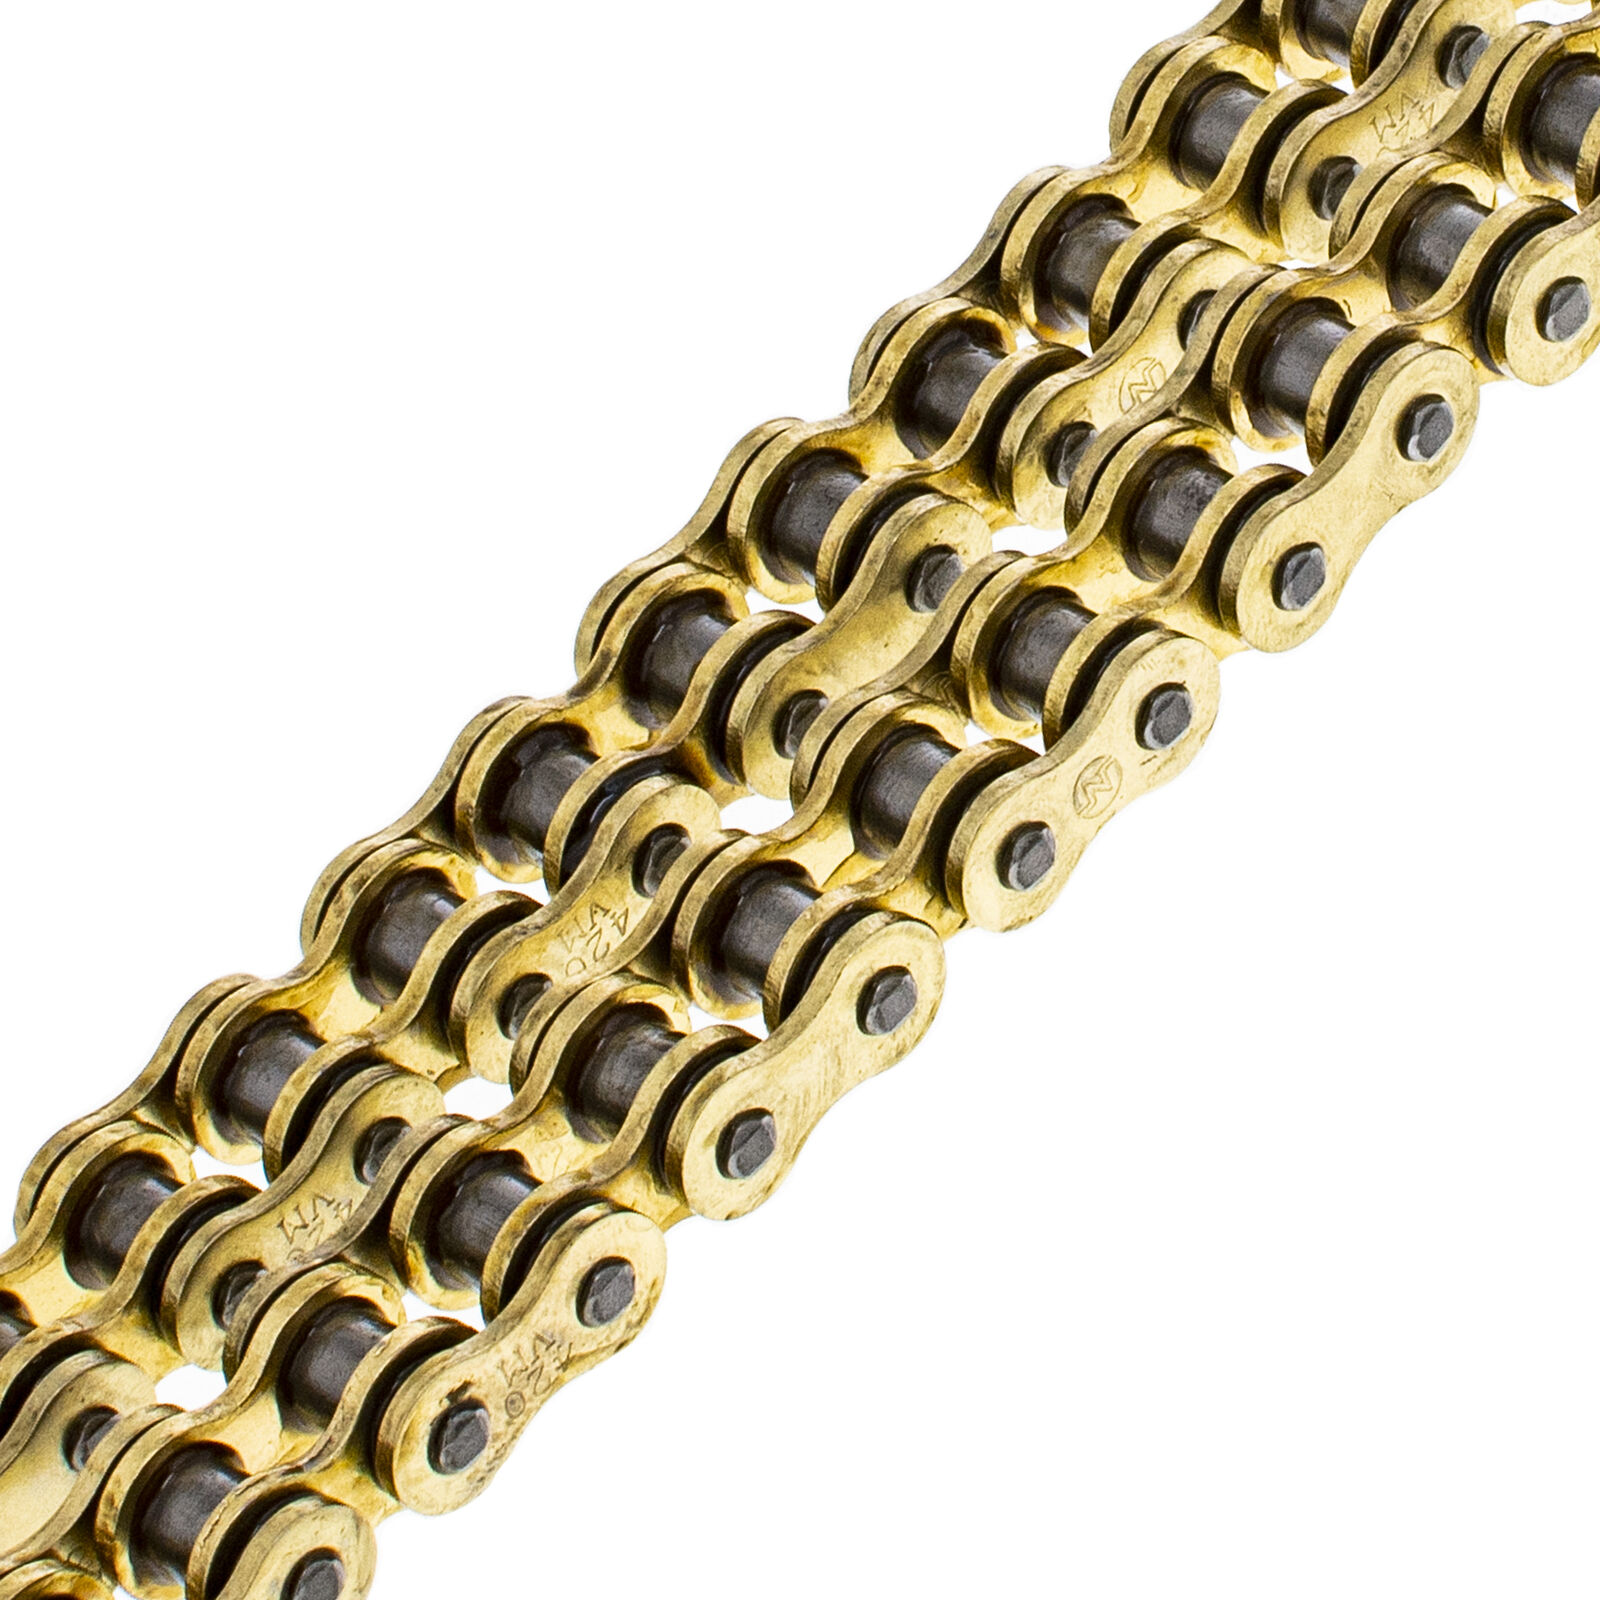 NICHE Gold 420 X-Ring Chain 130 Links With Connecting Master Link Motorcycle